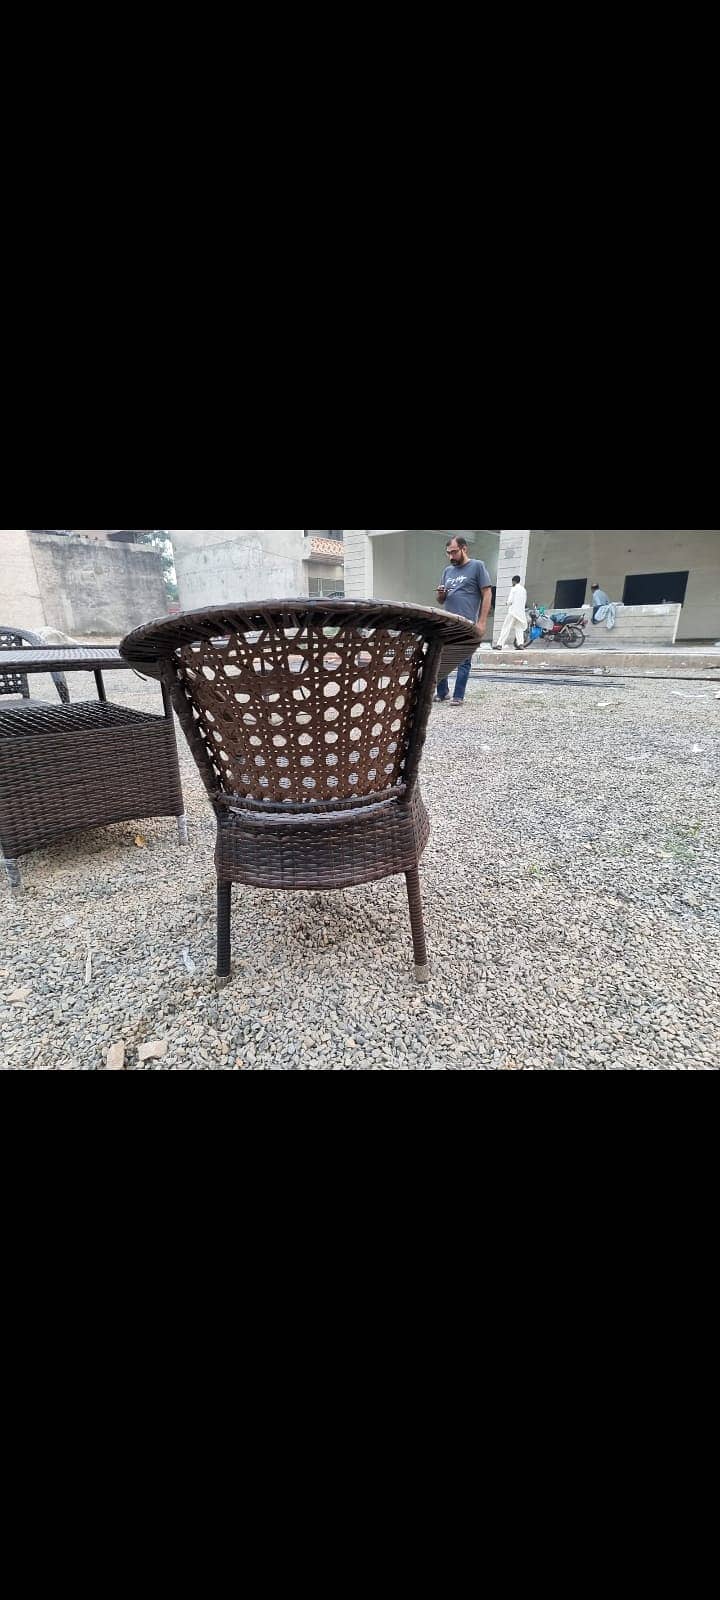 Rattan chairs indoor outdoor, resturant chair, Sofa set 4 seater Sofe 4